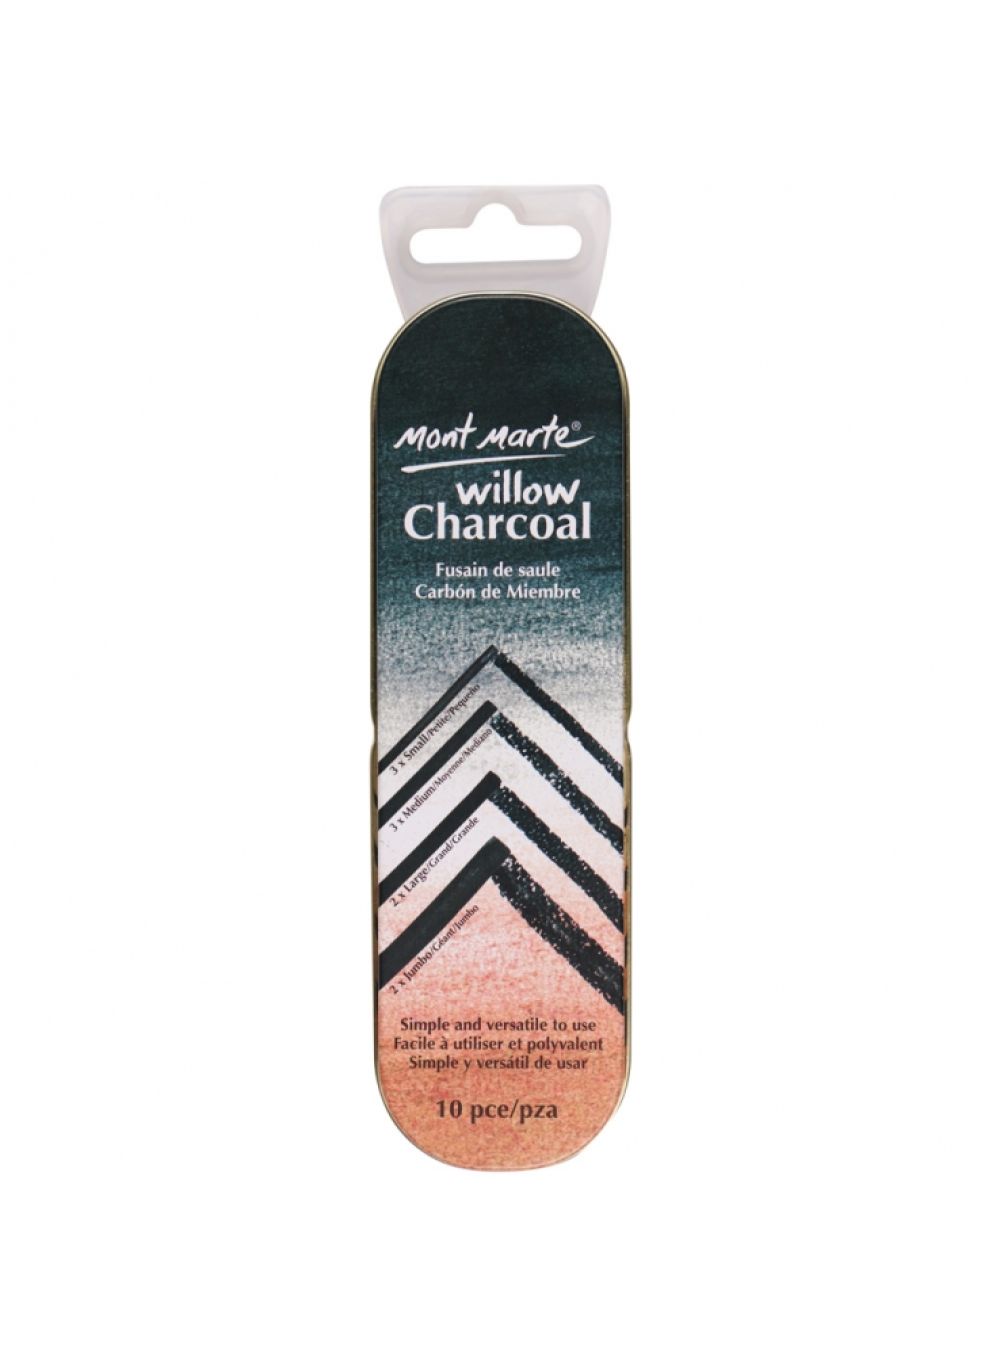 Mont Marte Signature Willow Charcoal in Tin 10pc